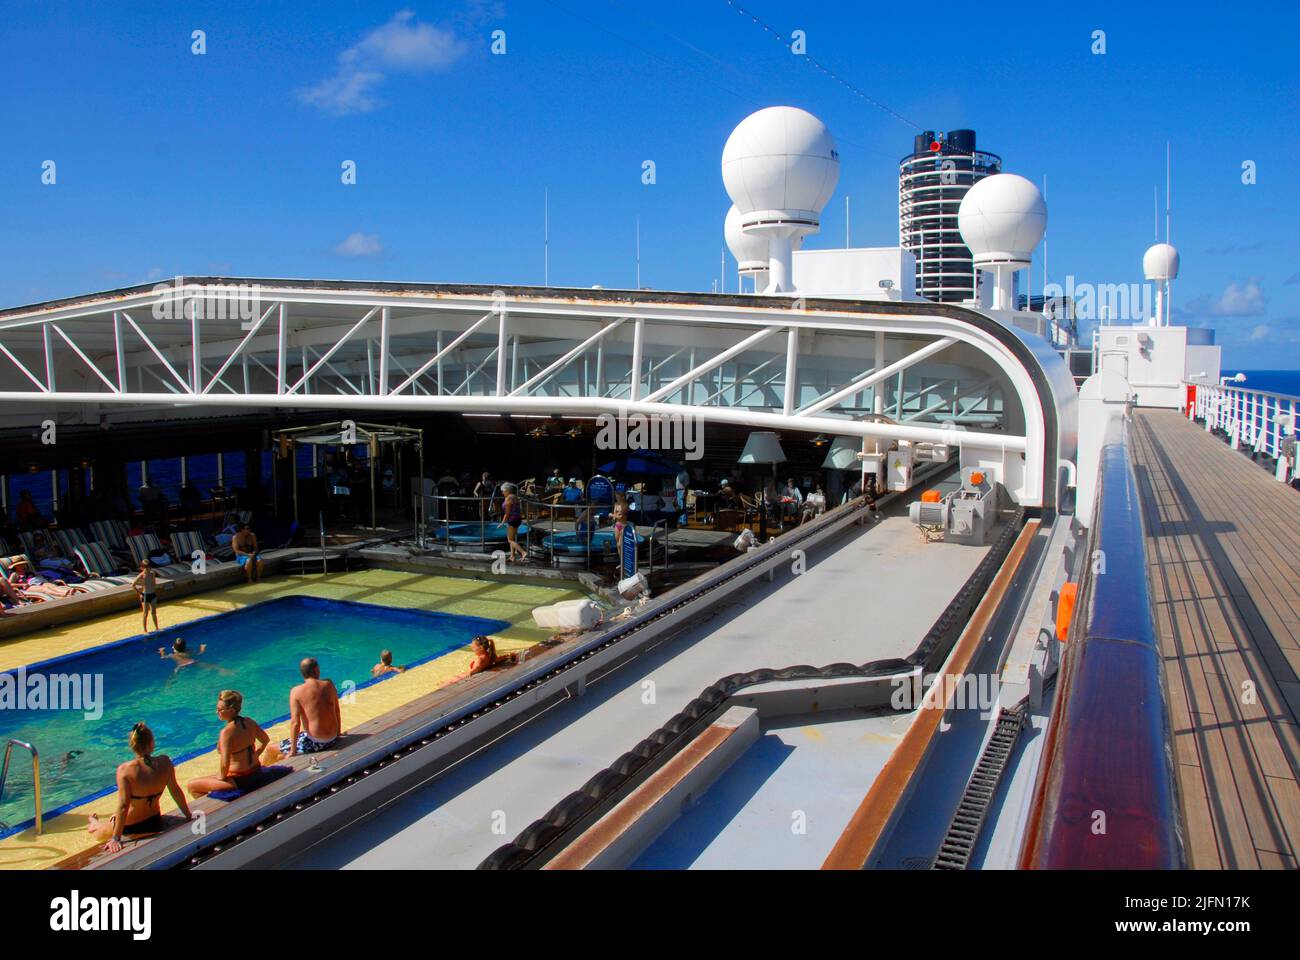 Passengers enjoying an open-air swimming pool amidships aboard a Caribbean cruise liner at sea Stock Photo